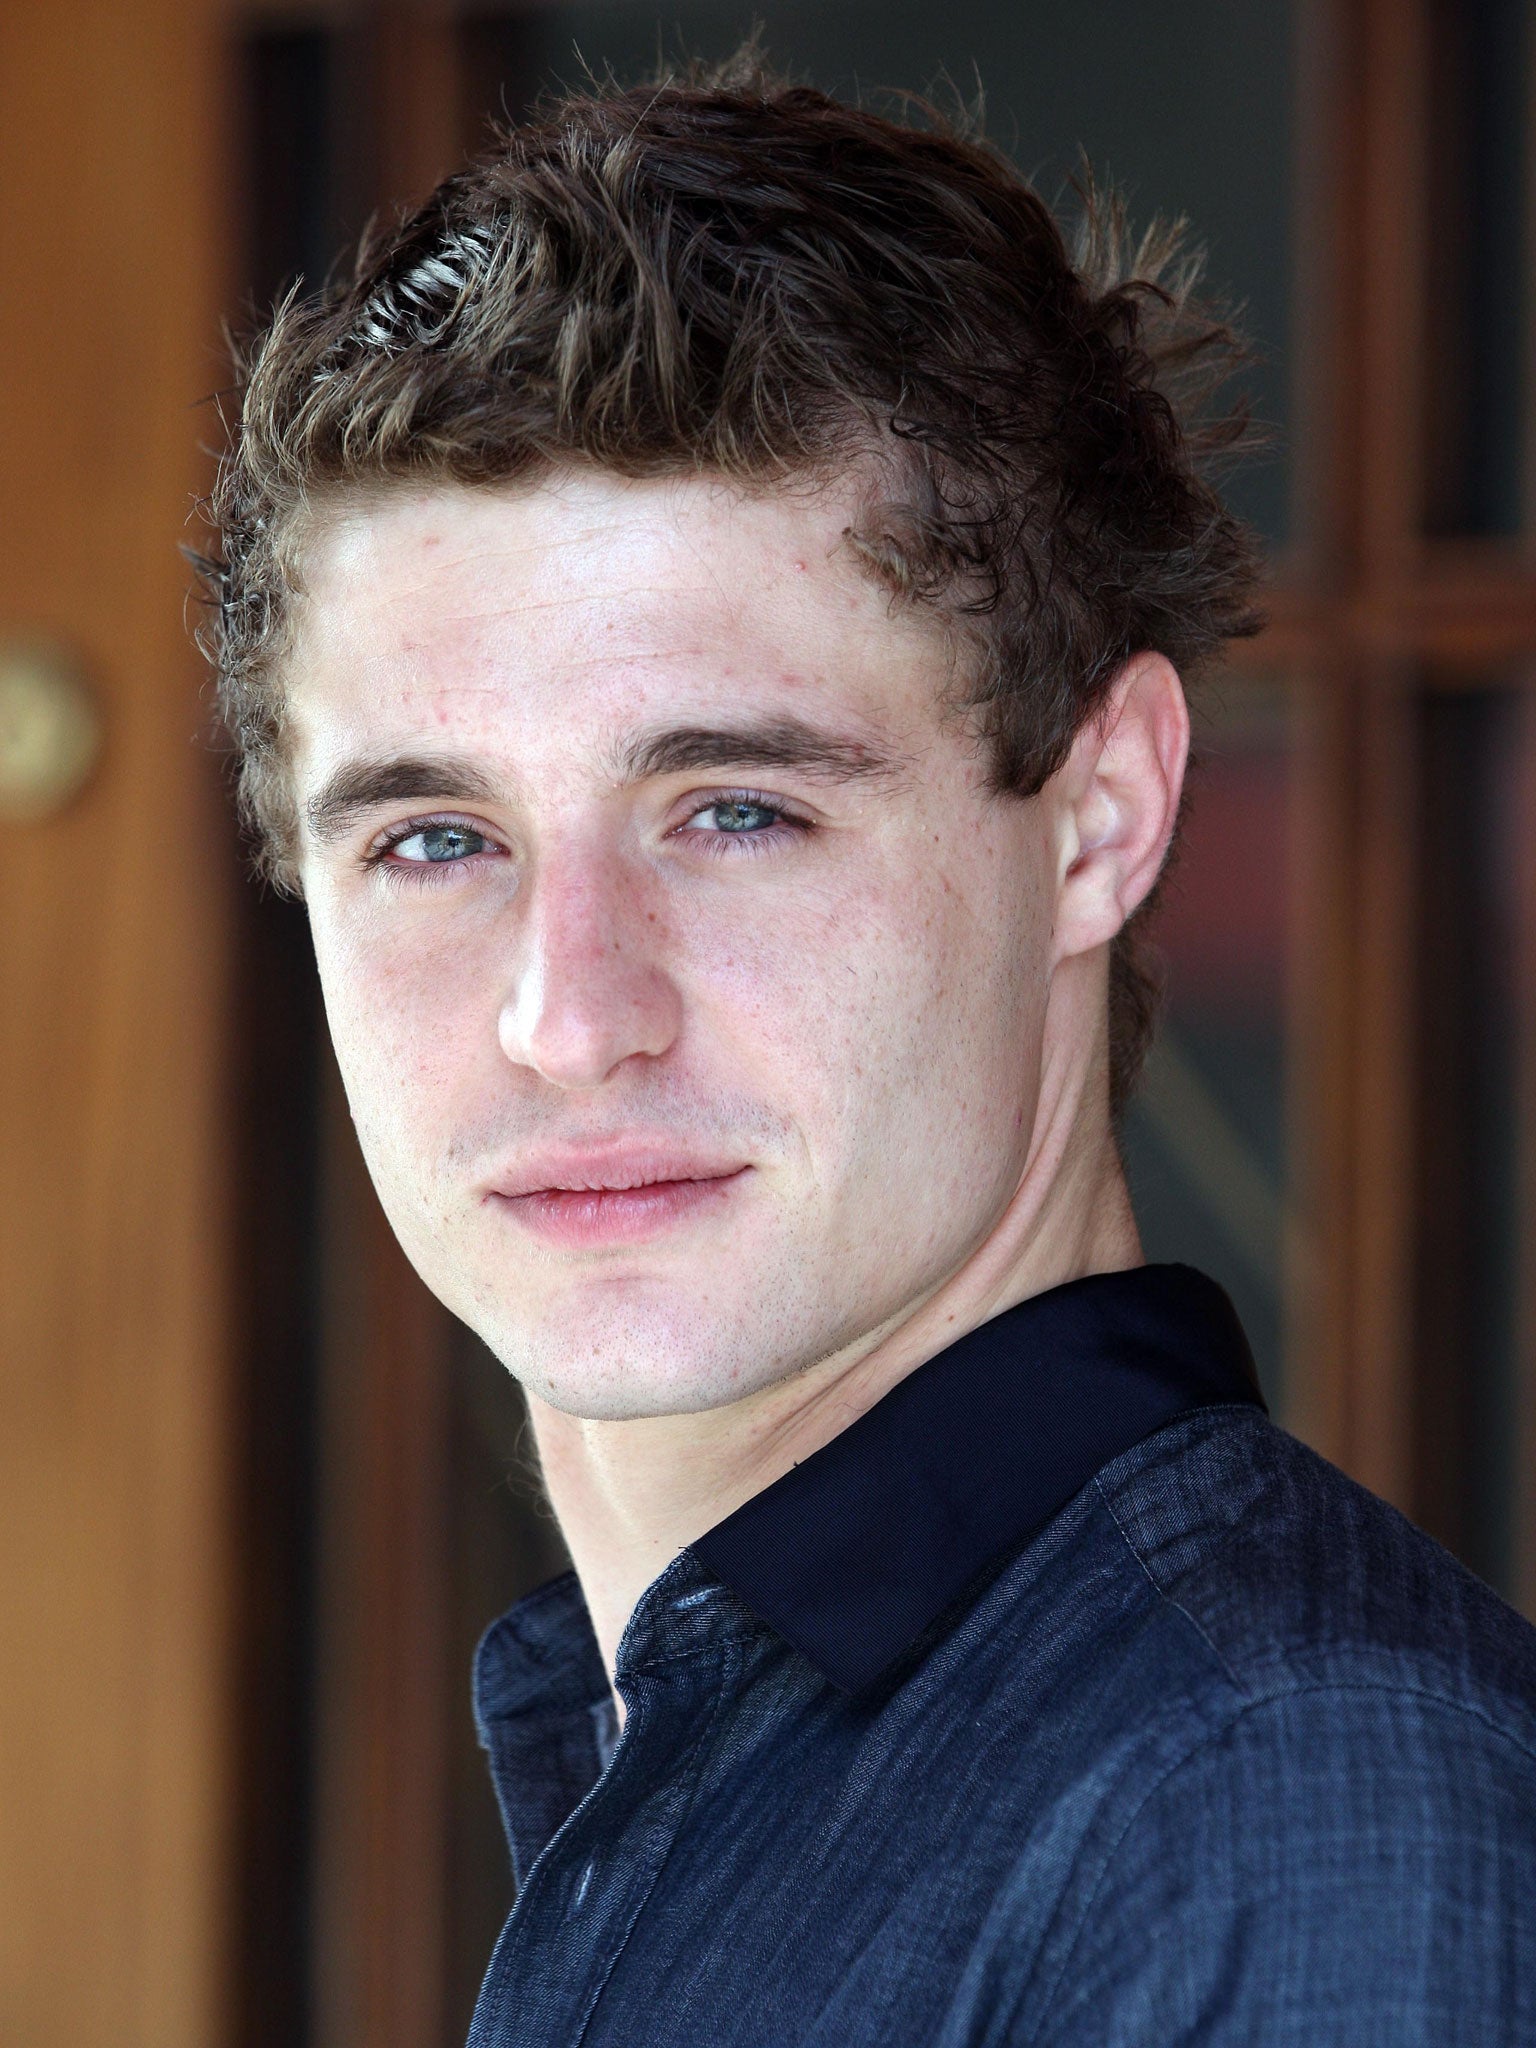 His own man Max Irons would prefer not to be known as the 'next R-Patz'